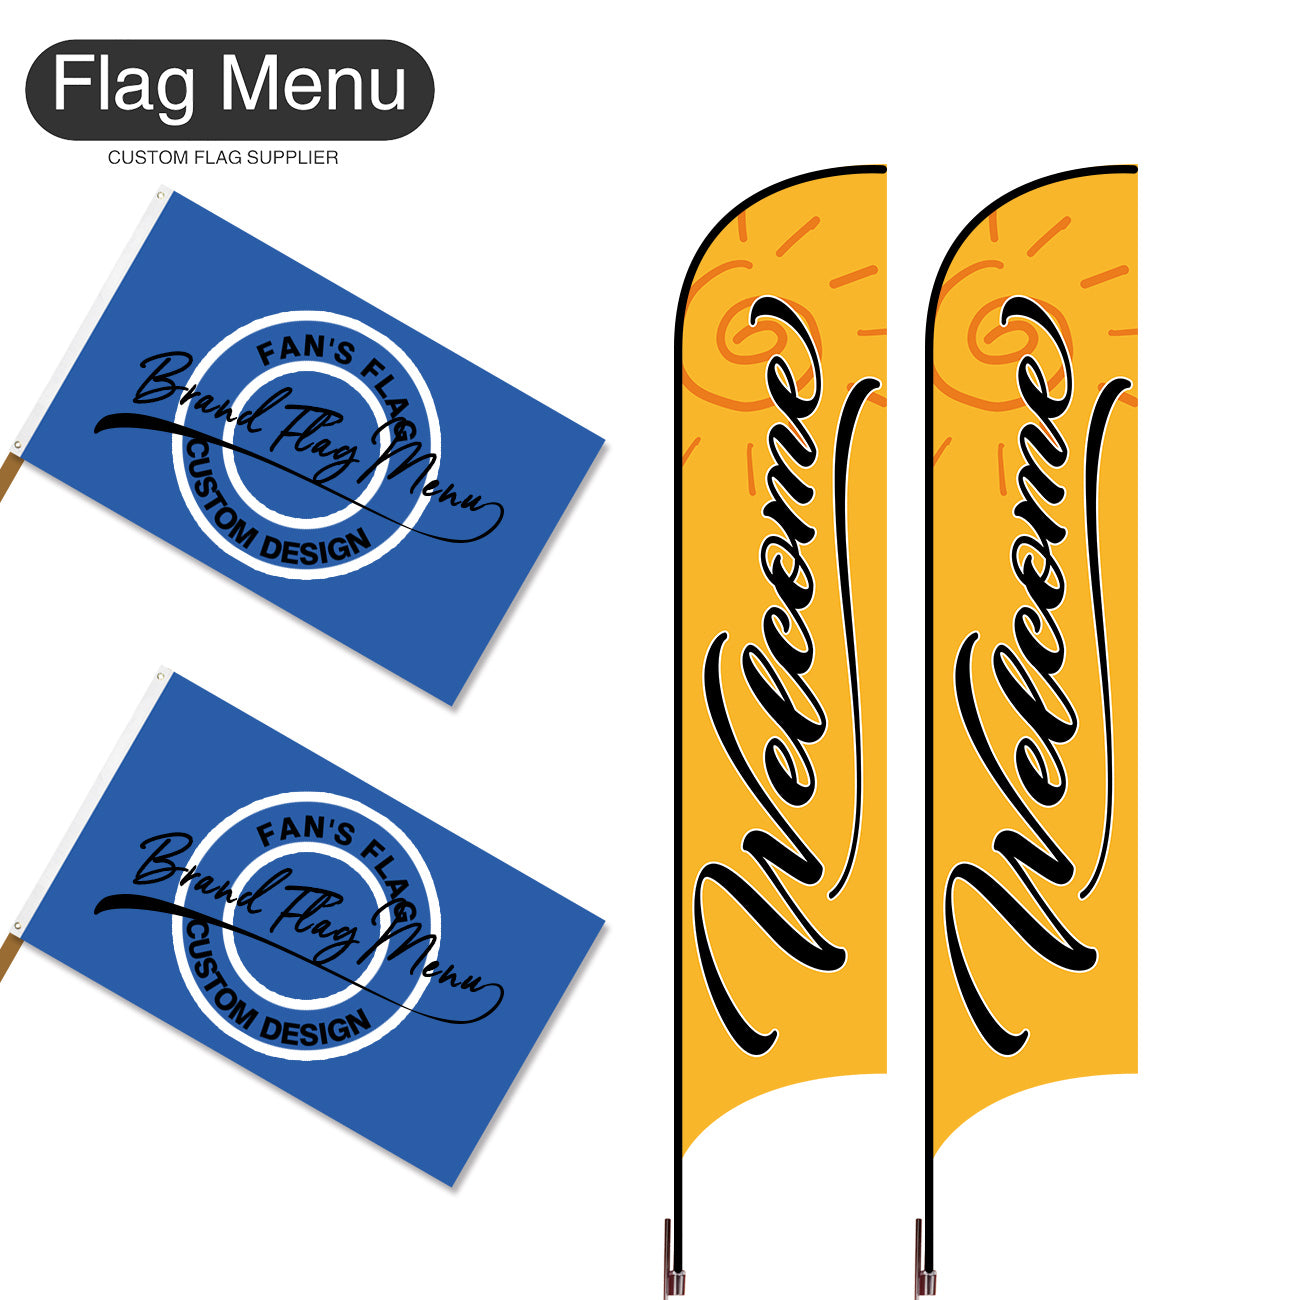 Outdoor Advertising Set - D-Yellow A-S - Feather Flag -Double Sided & 3'x5' Regular Flag -Single Sided-Cross & Water Bag-Flag Menu